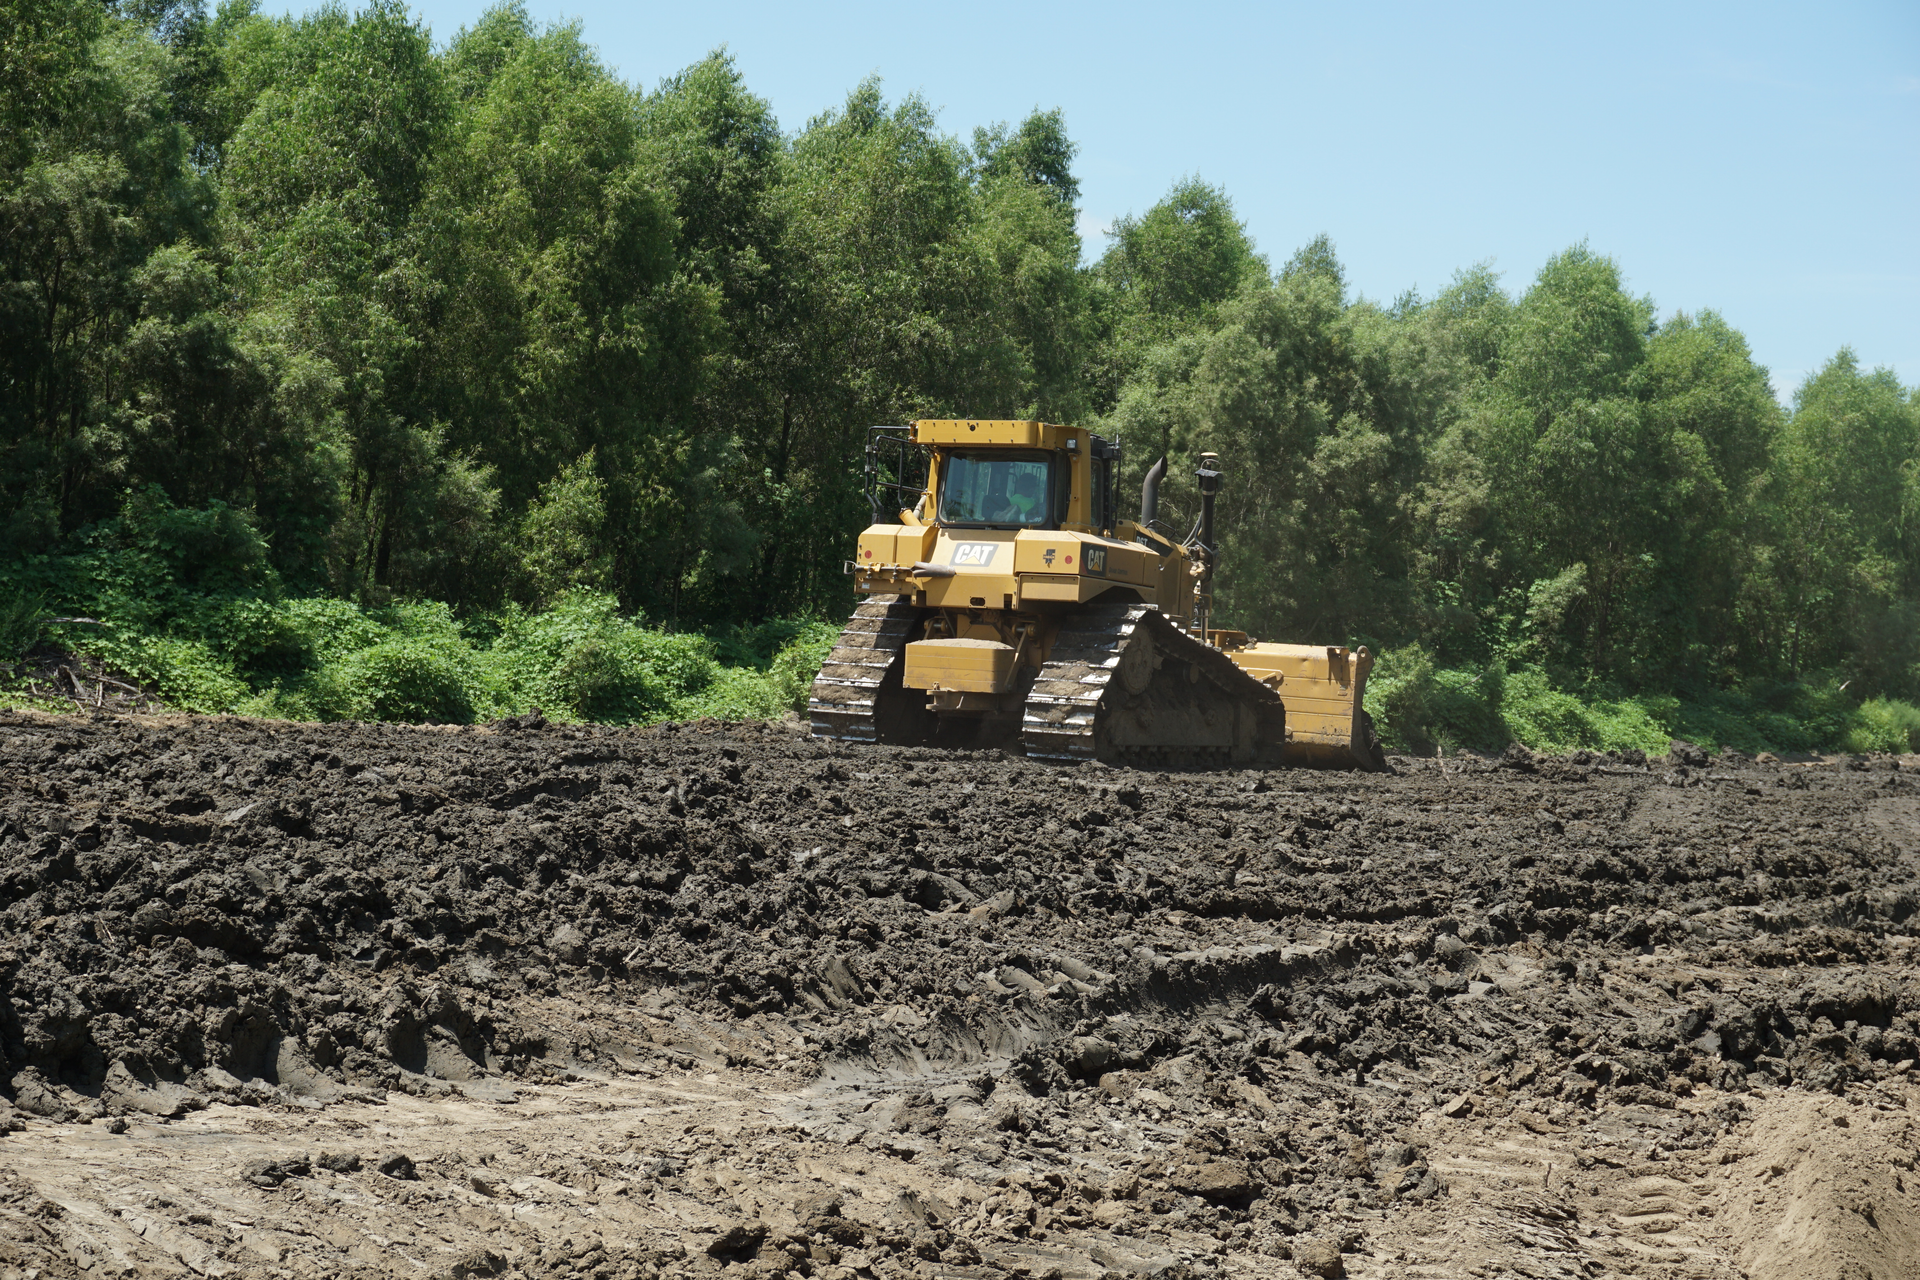 Oak Hill contractors serves several markets including coal mine reclamation, landfill cell construction and U.S. Army Corps of Engineers projects.